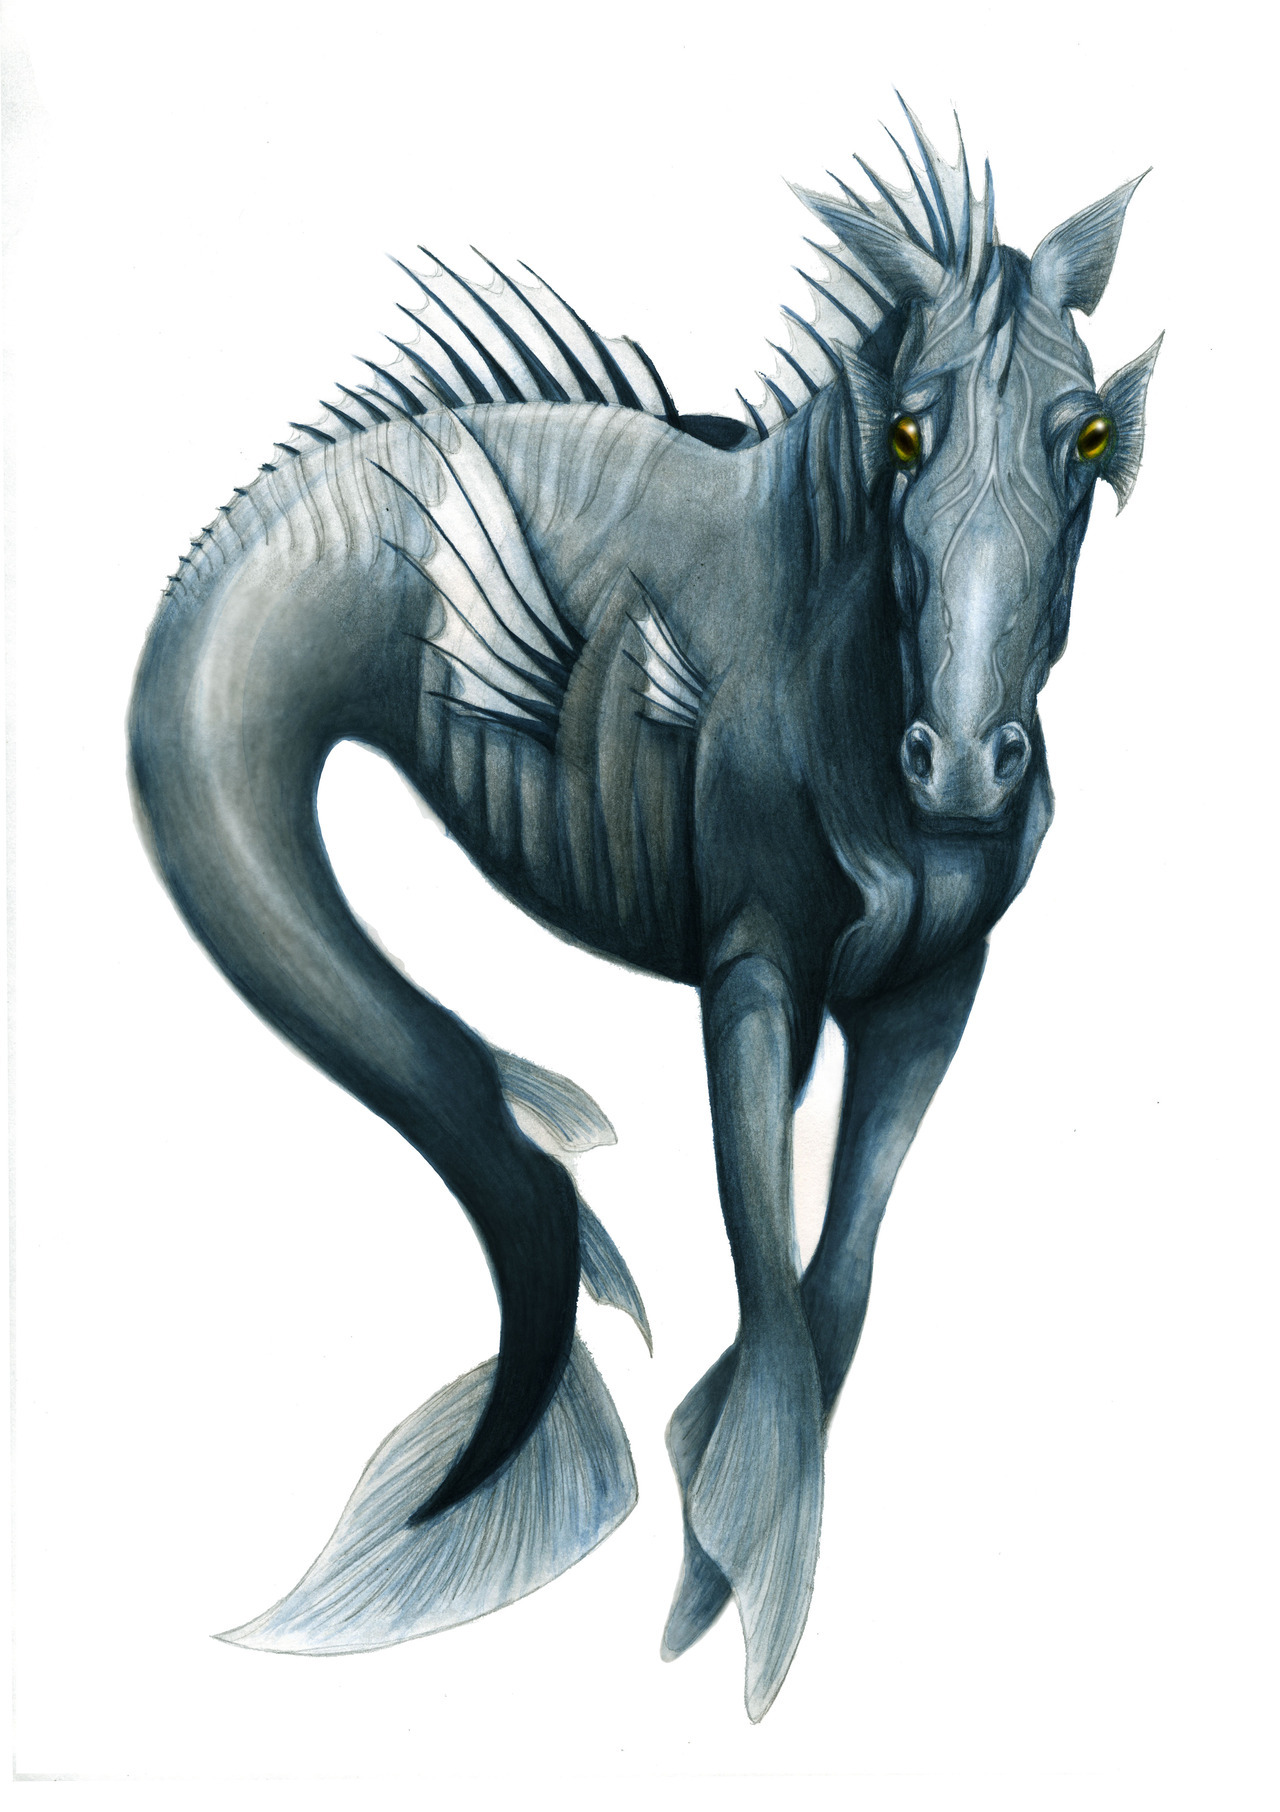 One of my final designs for my final major project of a Kelpie. Take a look at my blog to see more of my work (not all work posted is my own) http://nevarbeencuriouser.tumblr.com/